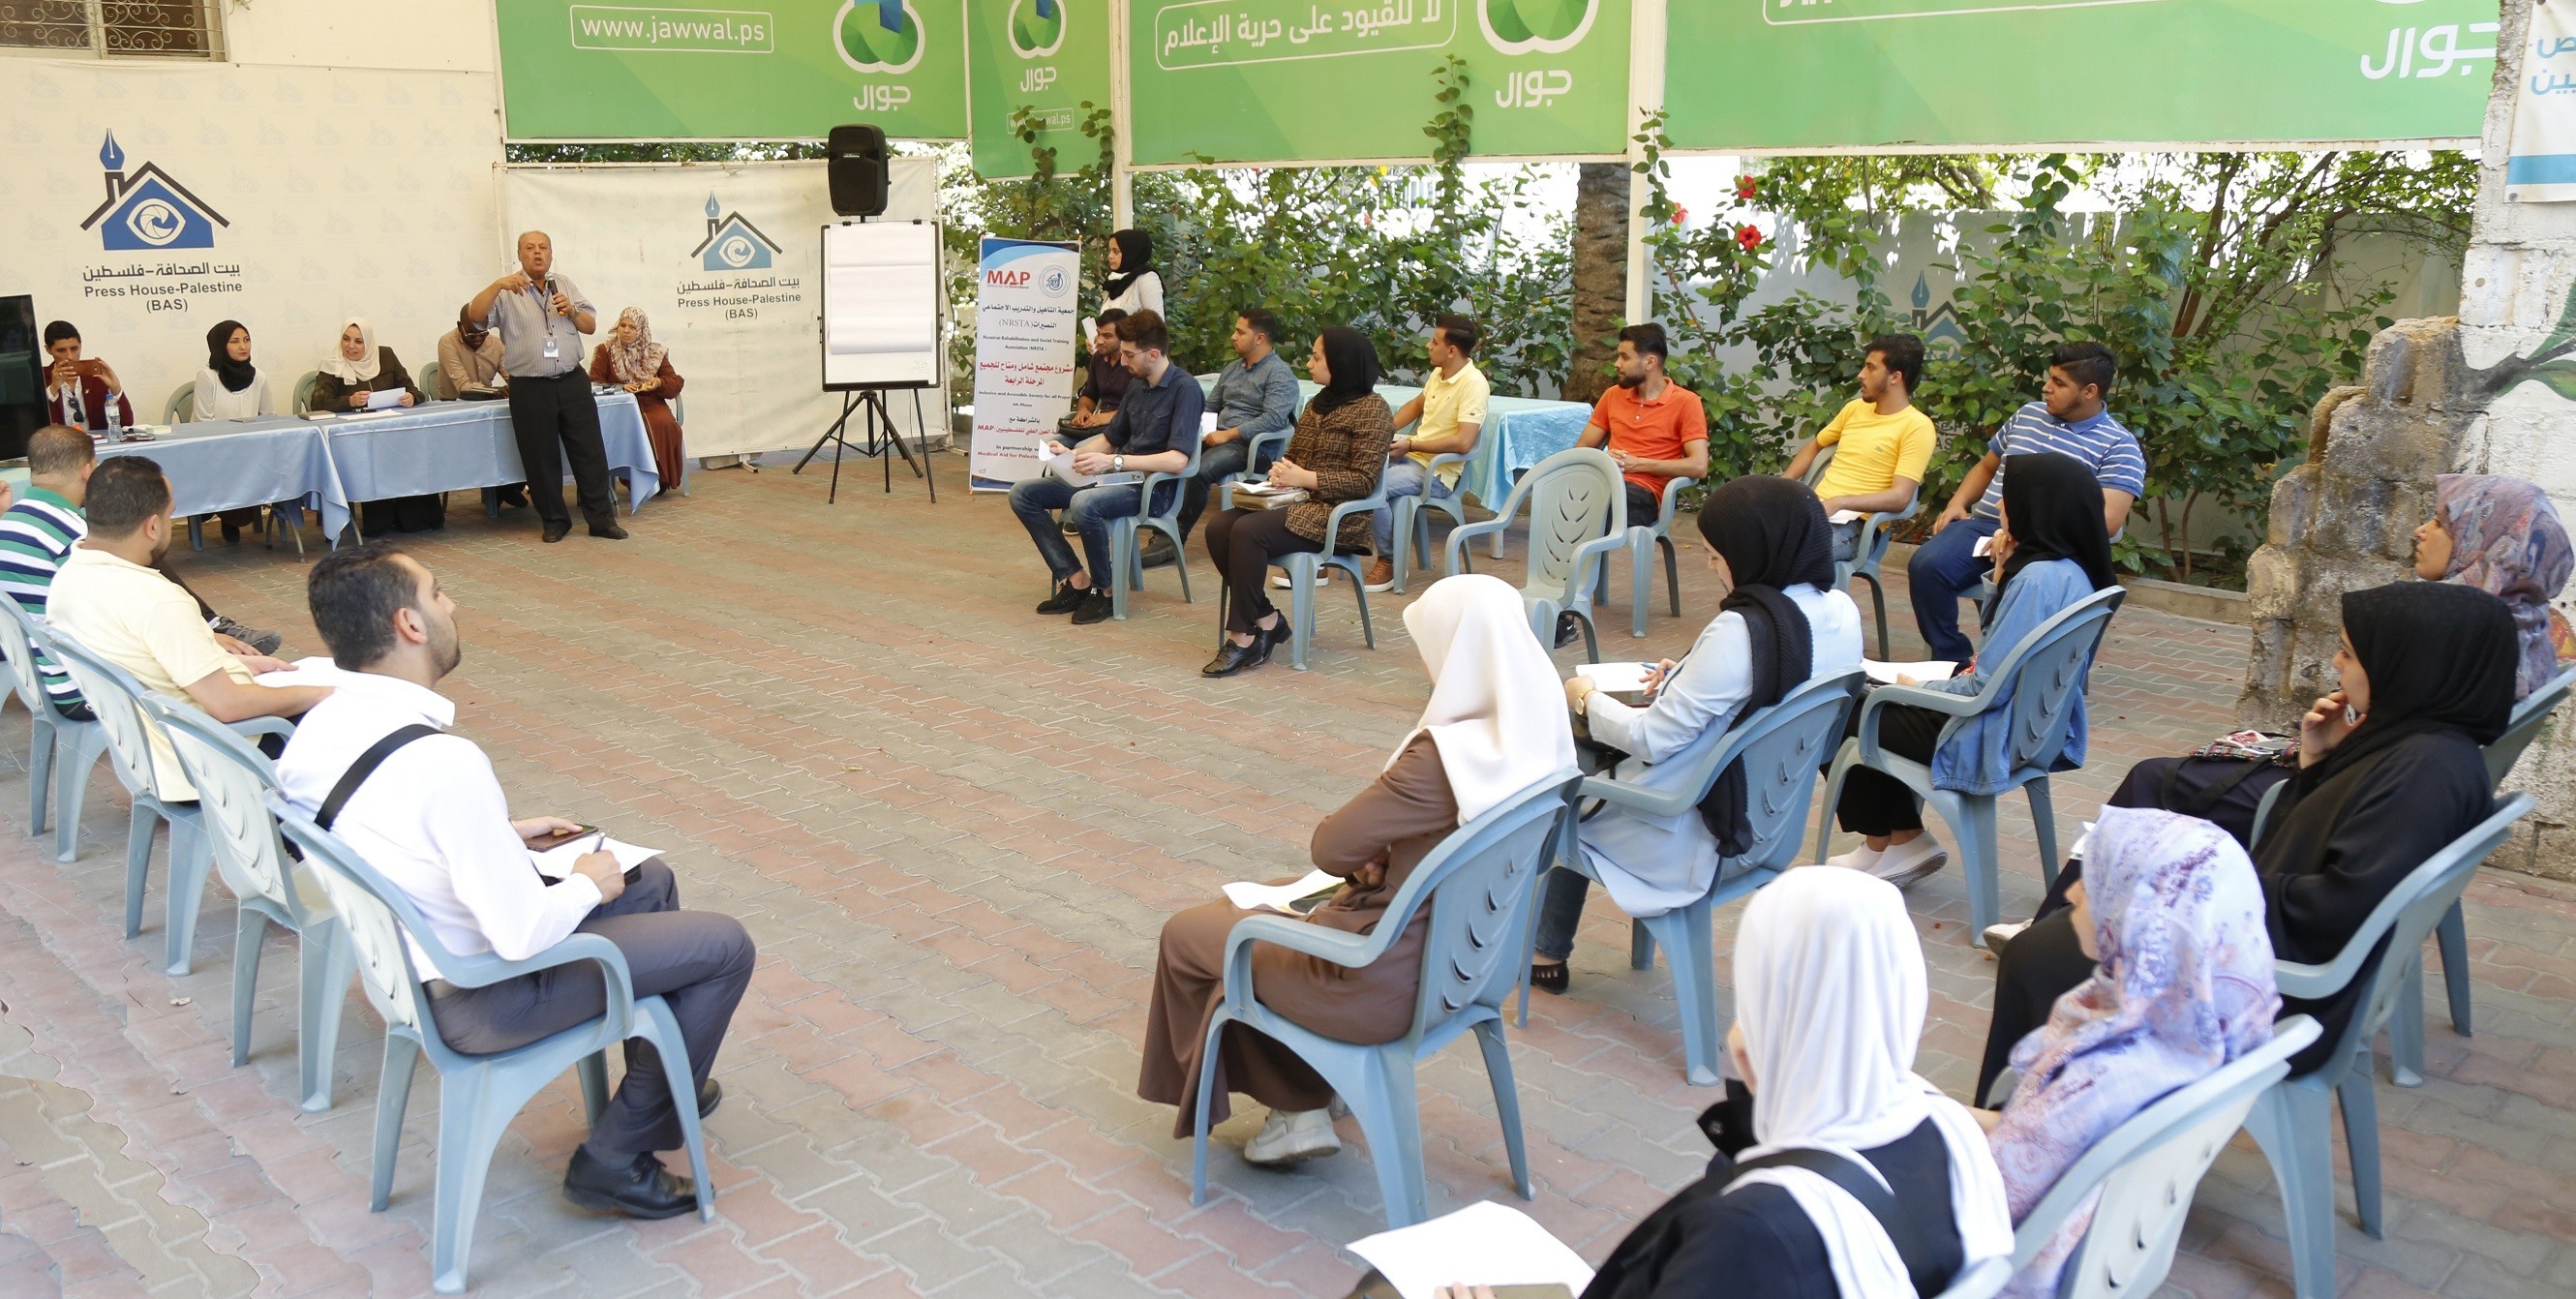 Press House hosts a workshop in collaboration with Al- Nusuirat Rehabilitation and Social Training Association